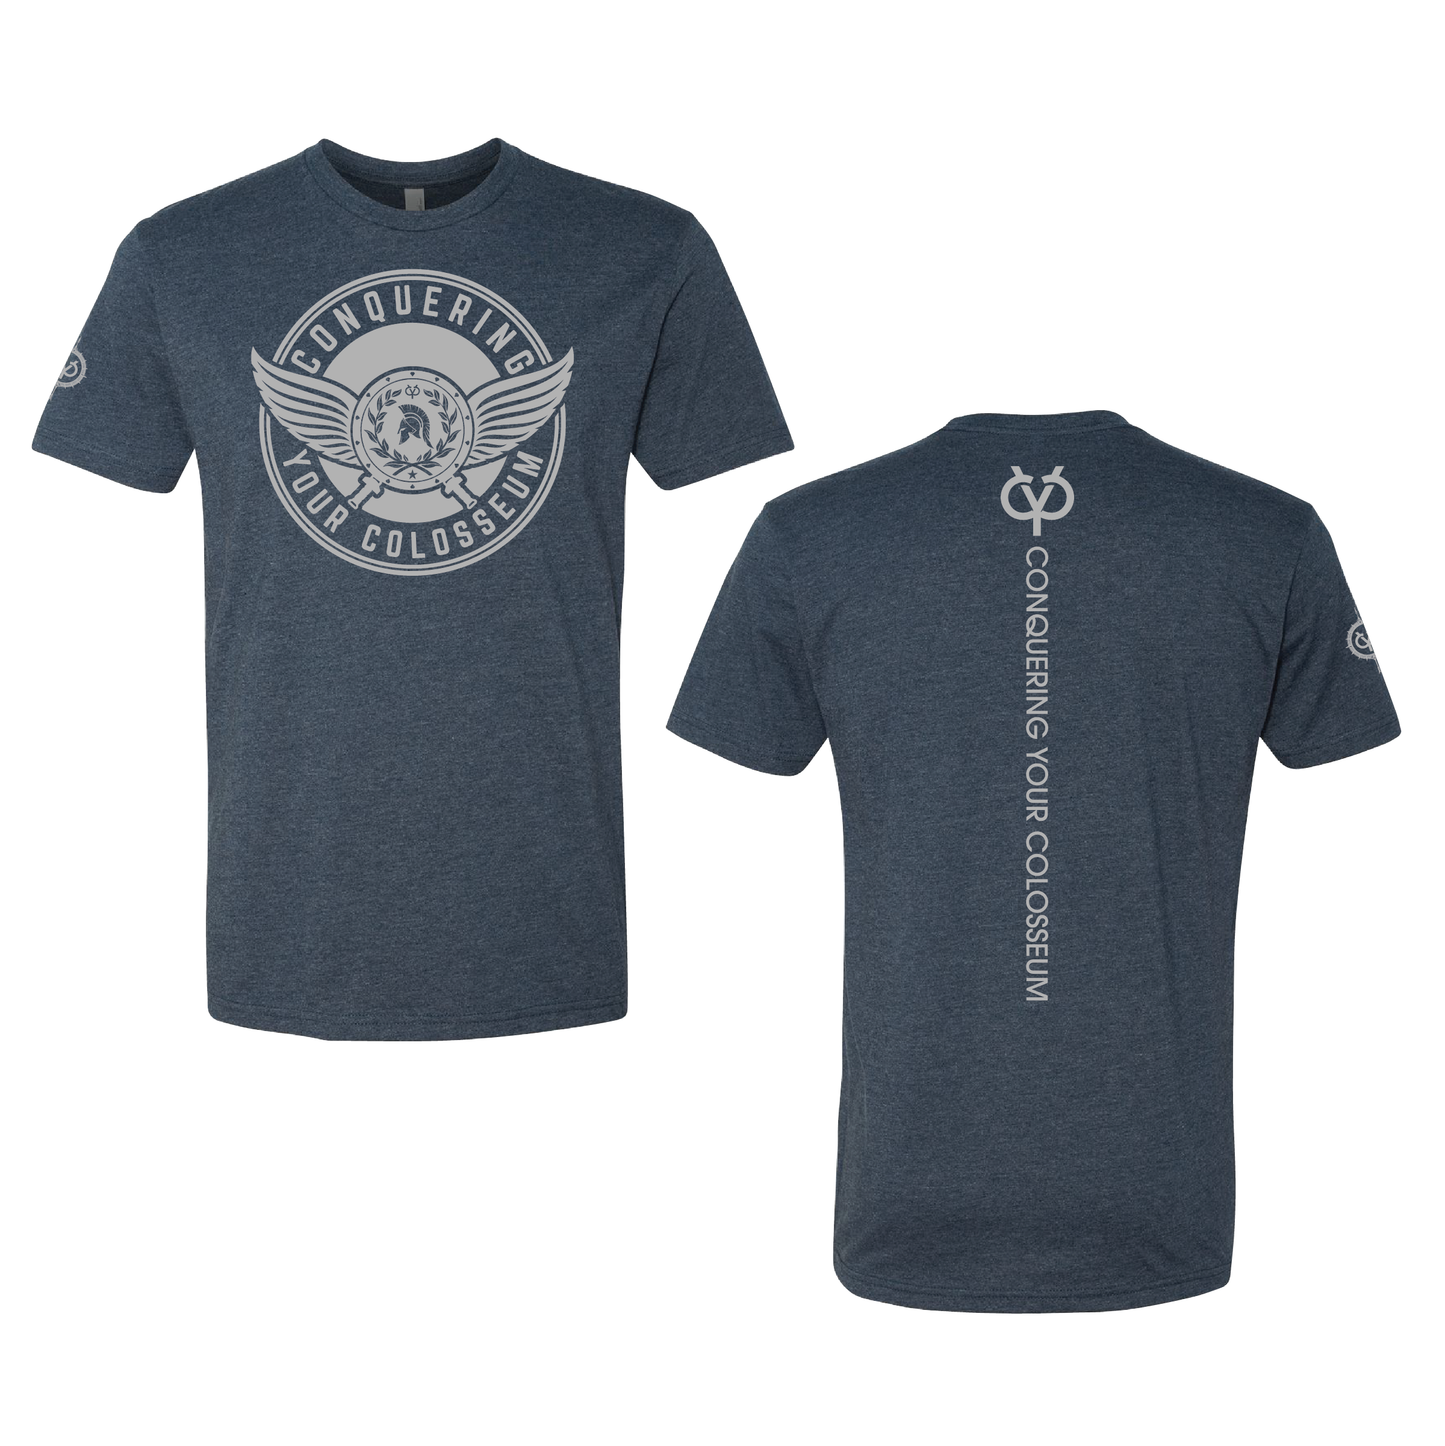 Winged Medallion CYC Conquering - Adult Tee